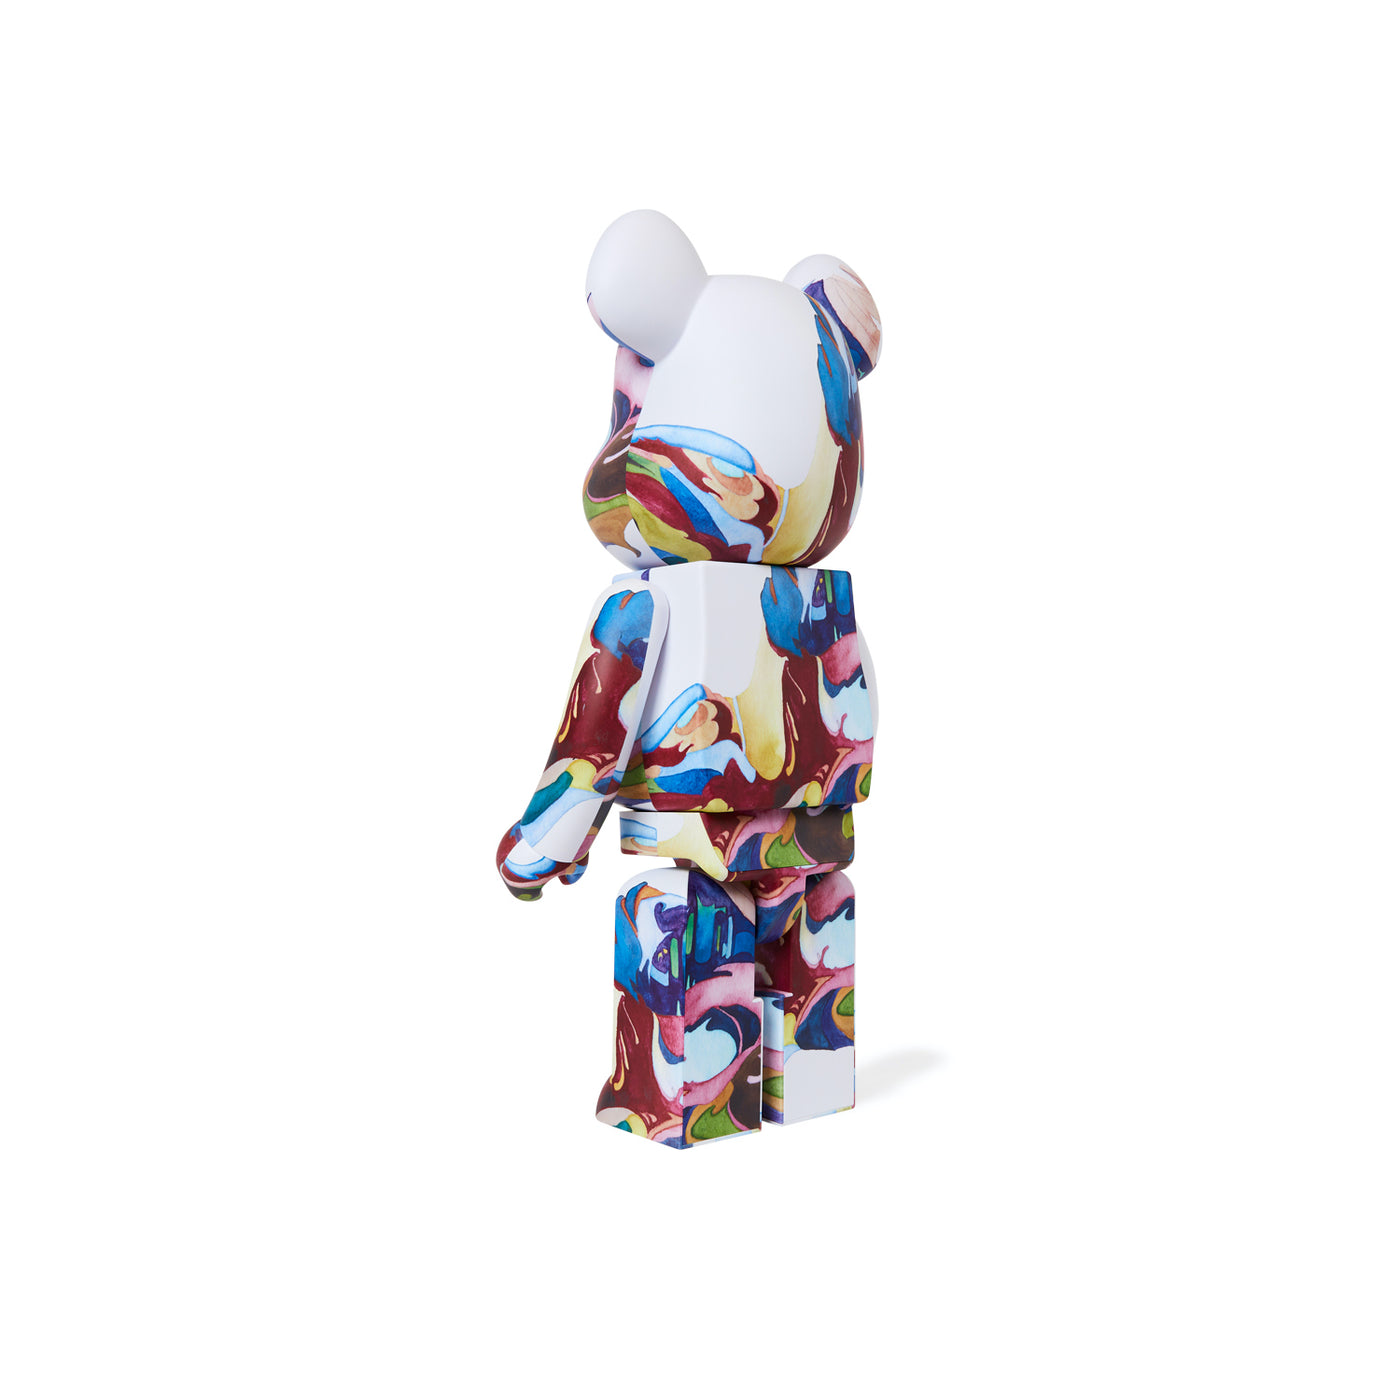 BE@RBRICK Nujabes “FIRST COLLECTION” | www.causus.be